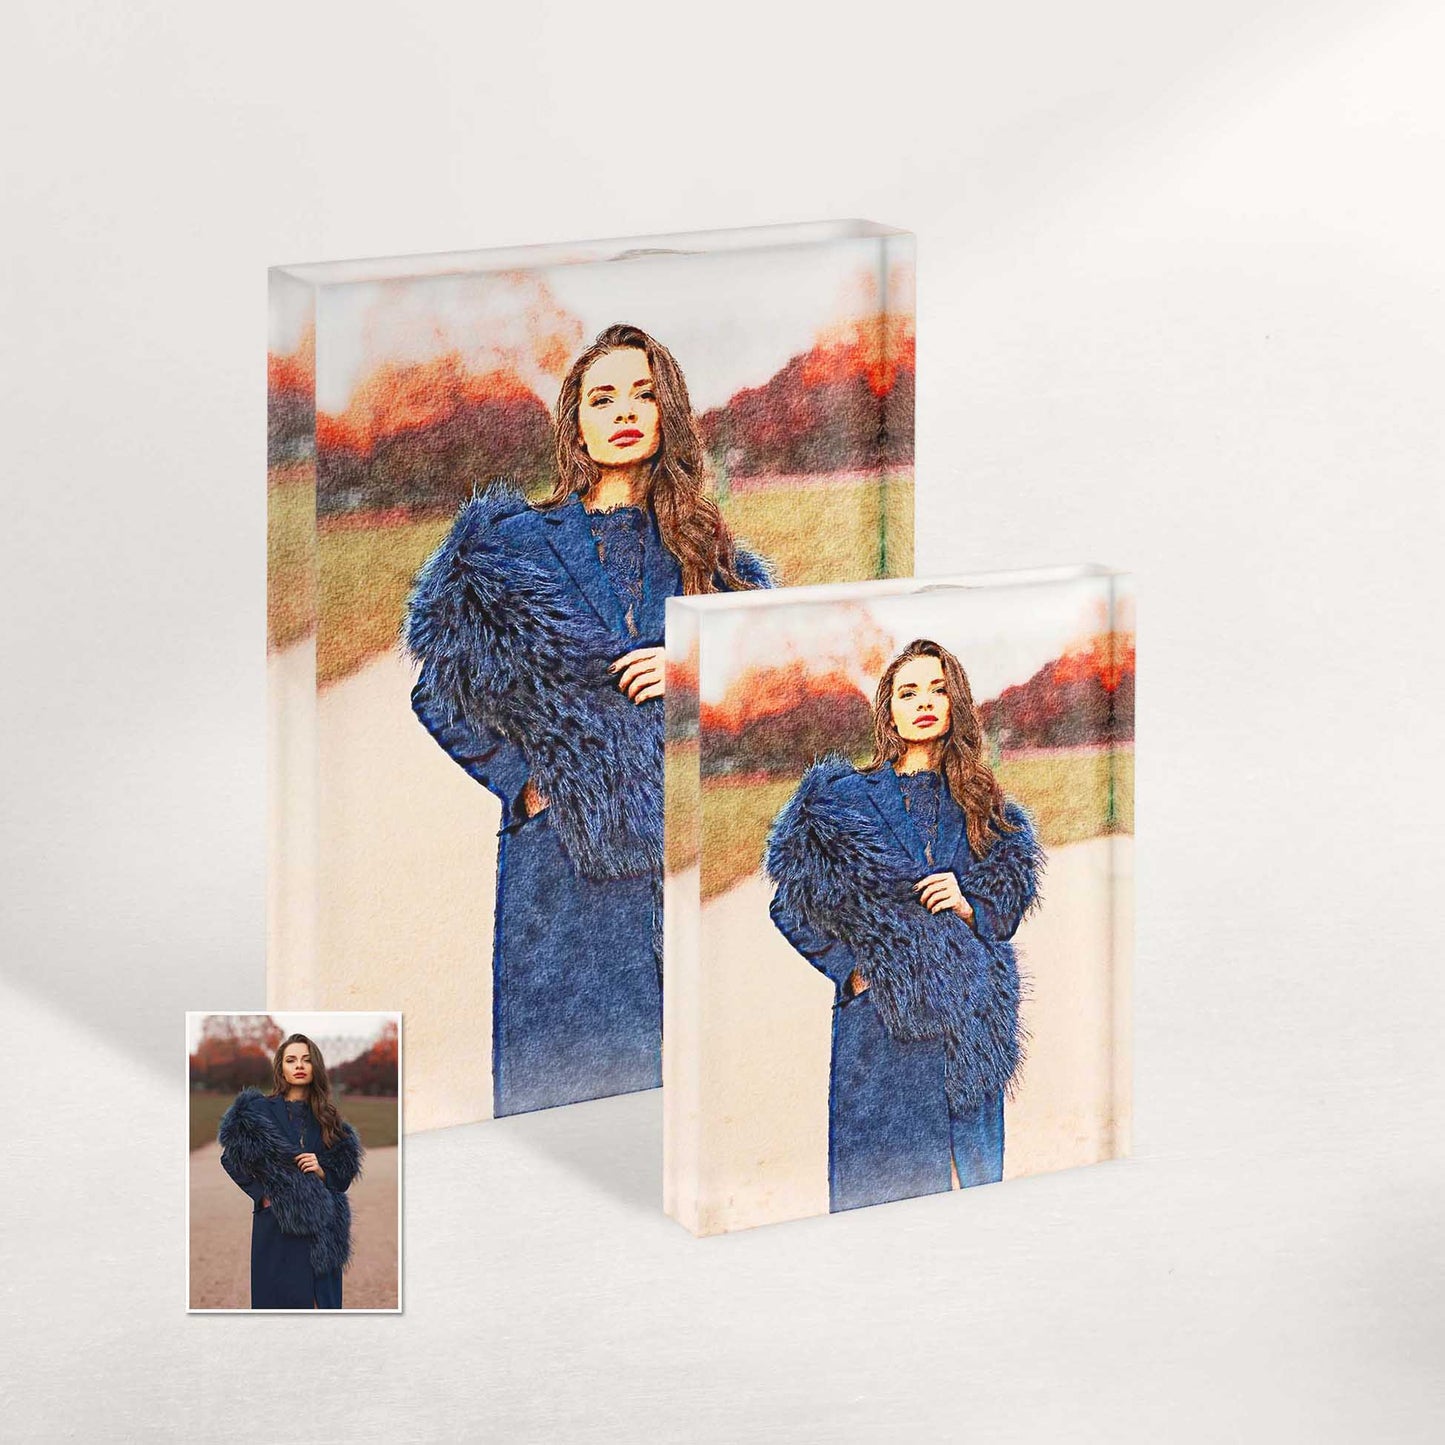 Celebrate your memories with our Personalised Just Watercolor Effect Acrylic Block Photo. Each piece is crafted from your own photo, infusing it with a dreamy watercolor aesthetic